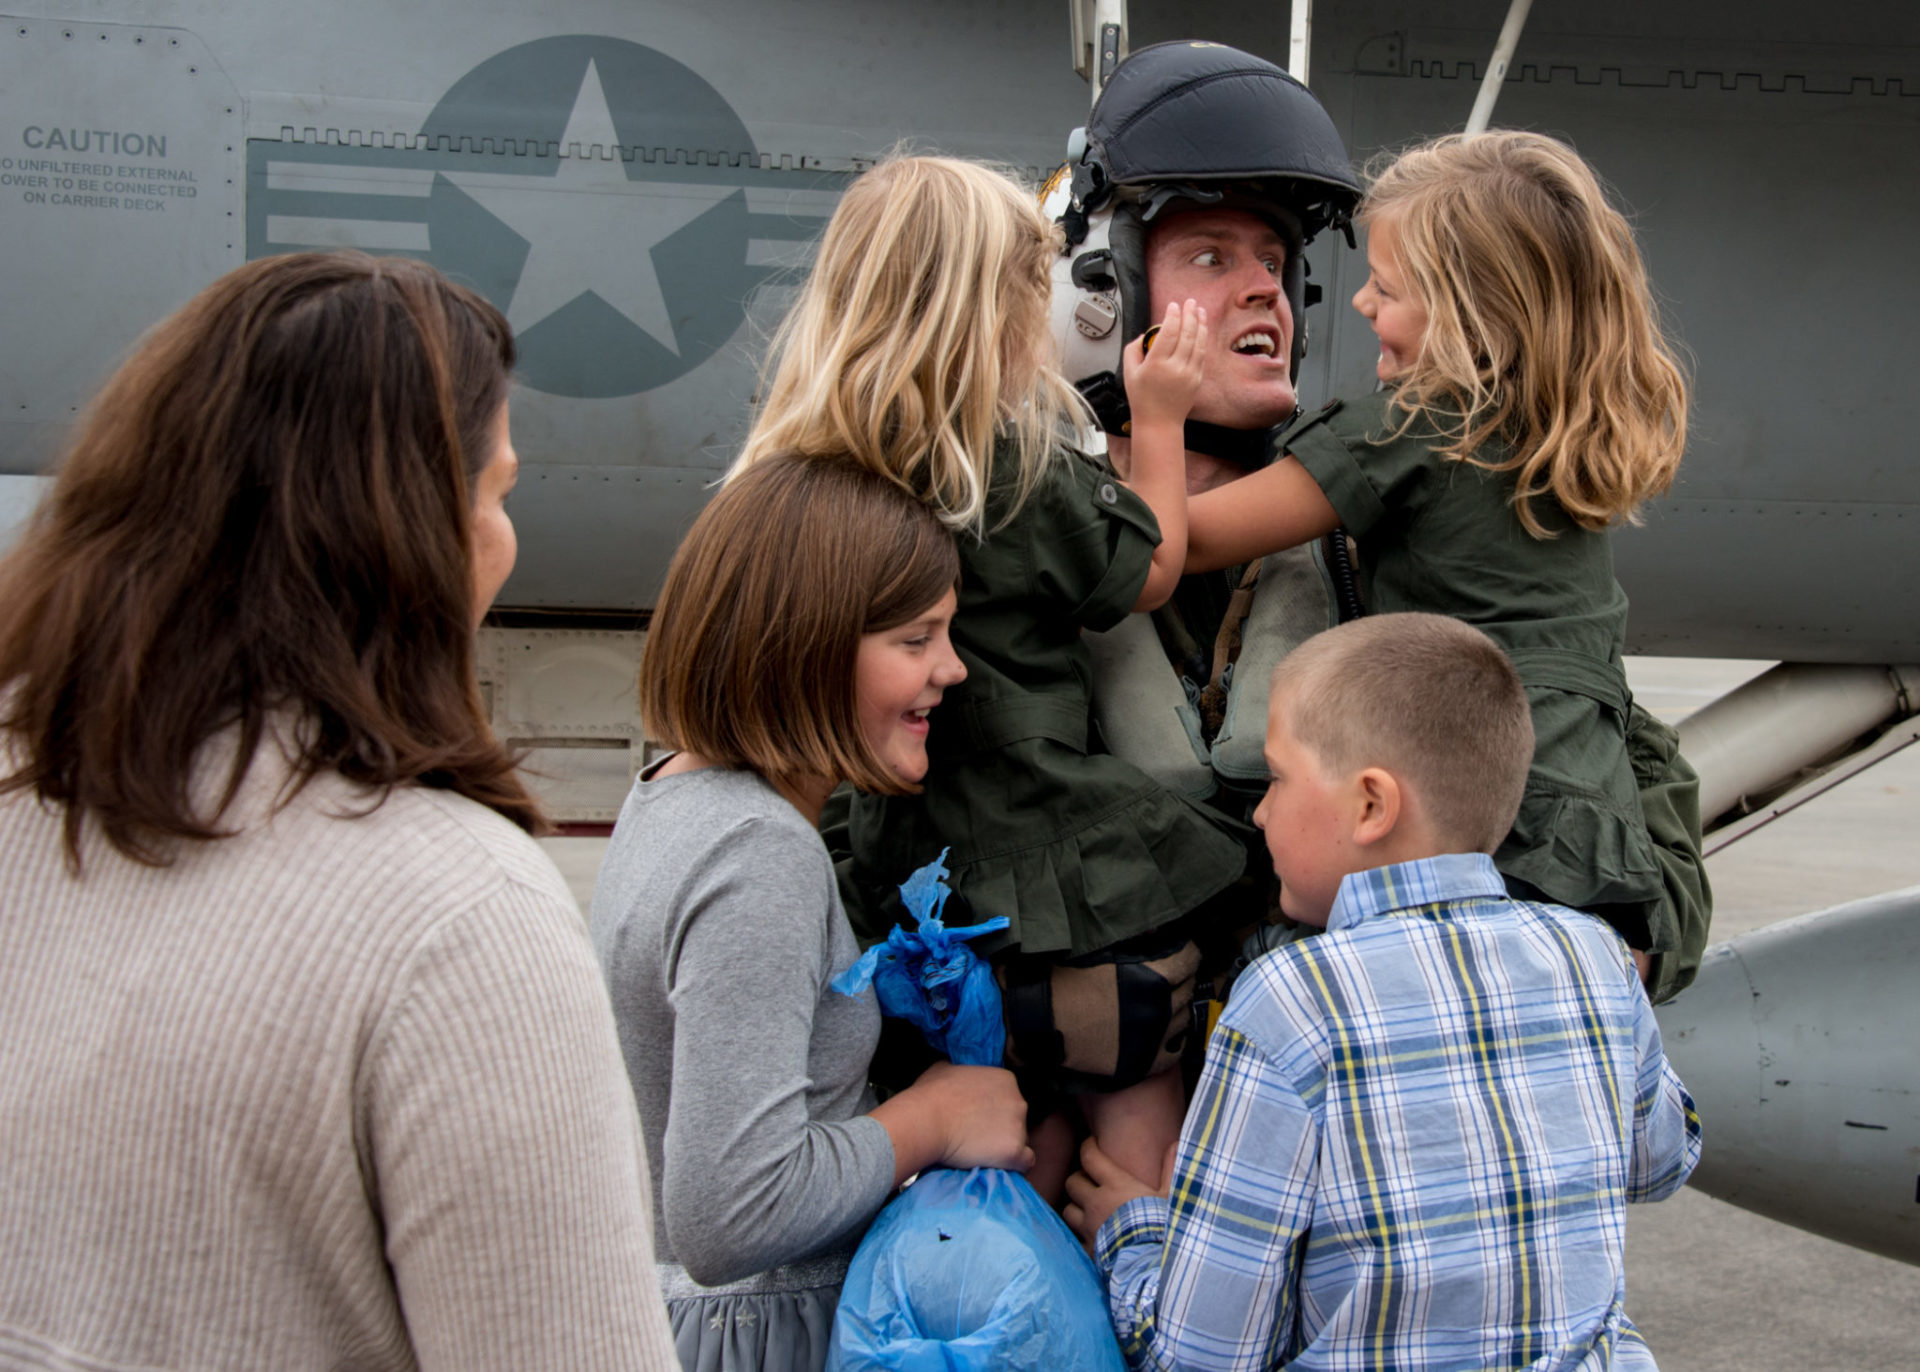 Strike Fighter Squadron (VFA) 27 Commanding Officer Cmdr. Daniel Cochran, from Kent, Wash., is greeted by family members as he returns to Naval Air Facility Atsugi from a patrol embarked aboard the Nimitz-class aircraft carrier USS Ronald Reagan (CVN 76).